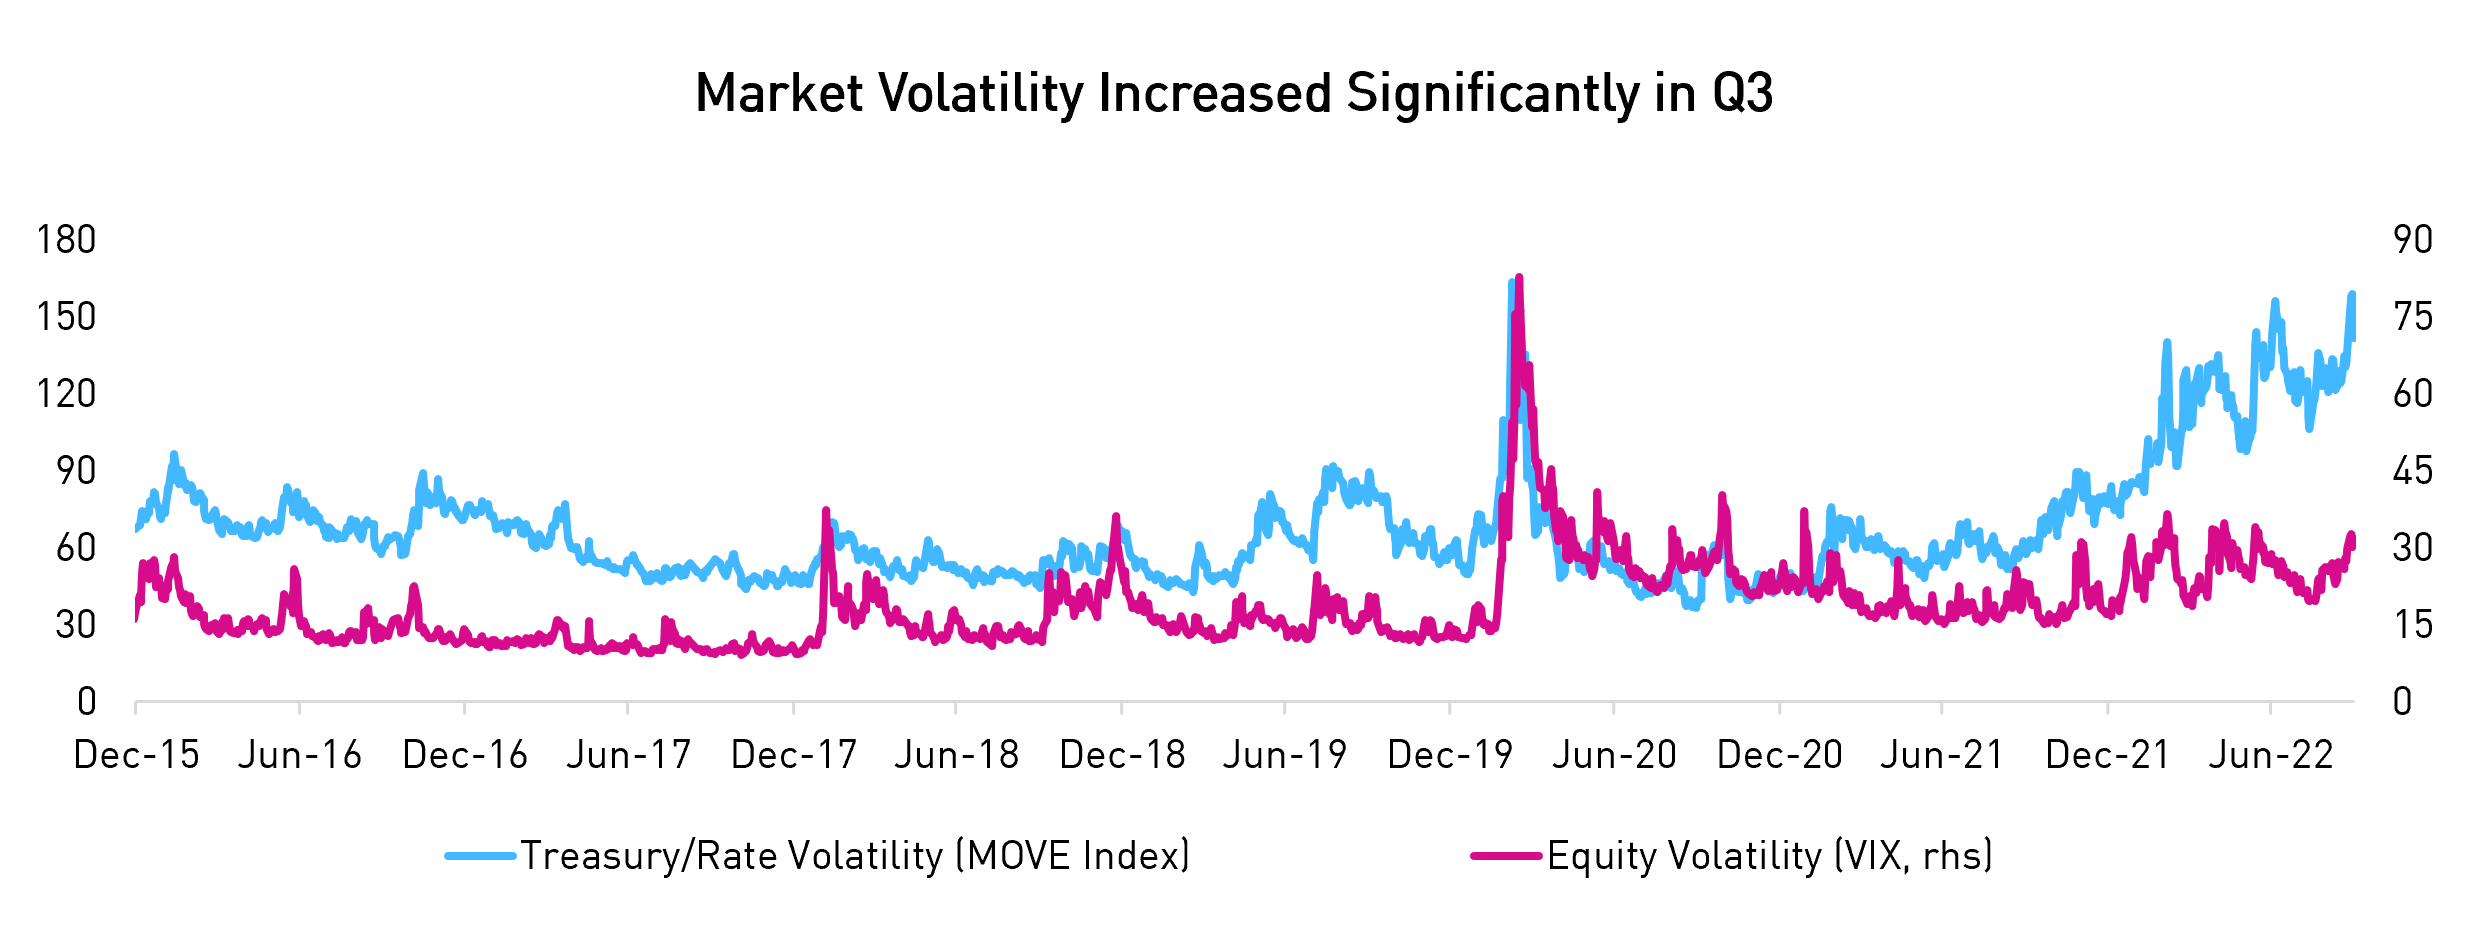 Chart showing treasury/rate volatility (MOVE Index) versus Equity Volatility (VIX, rhs), demonstrating increased market volatility in Q3 2022.